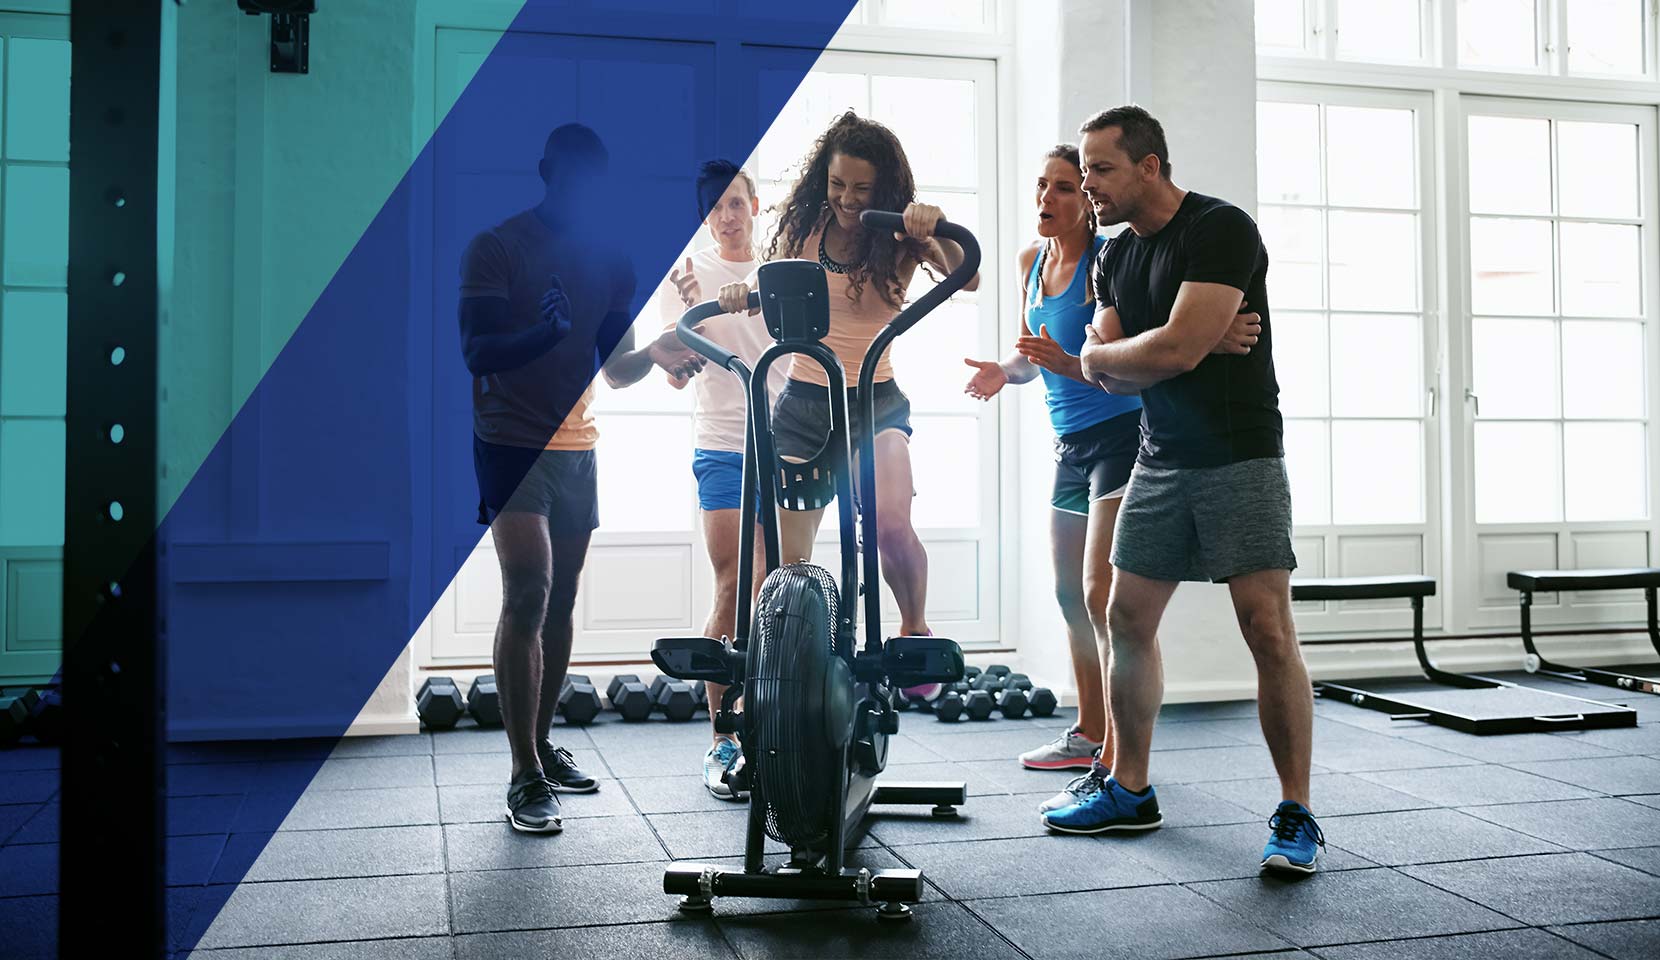 10 simple steps to improve the member onboarding process at your gym